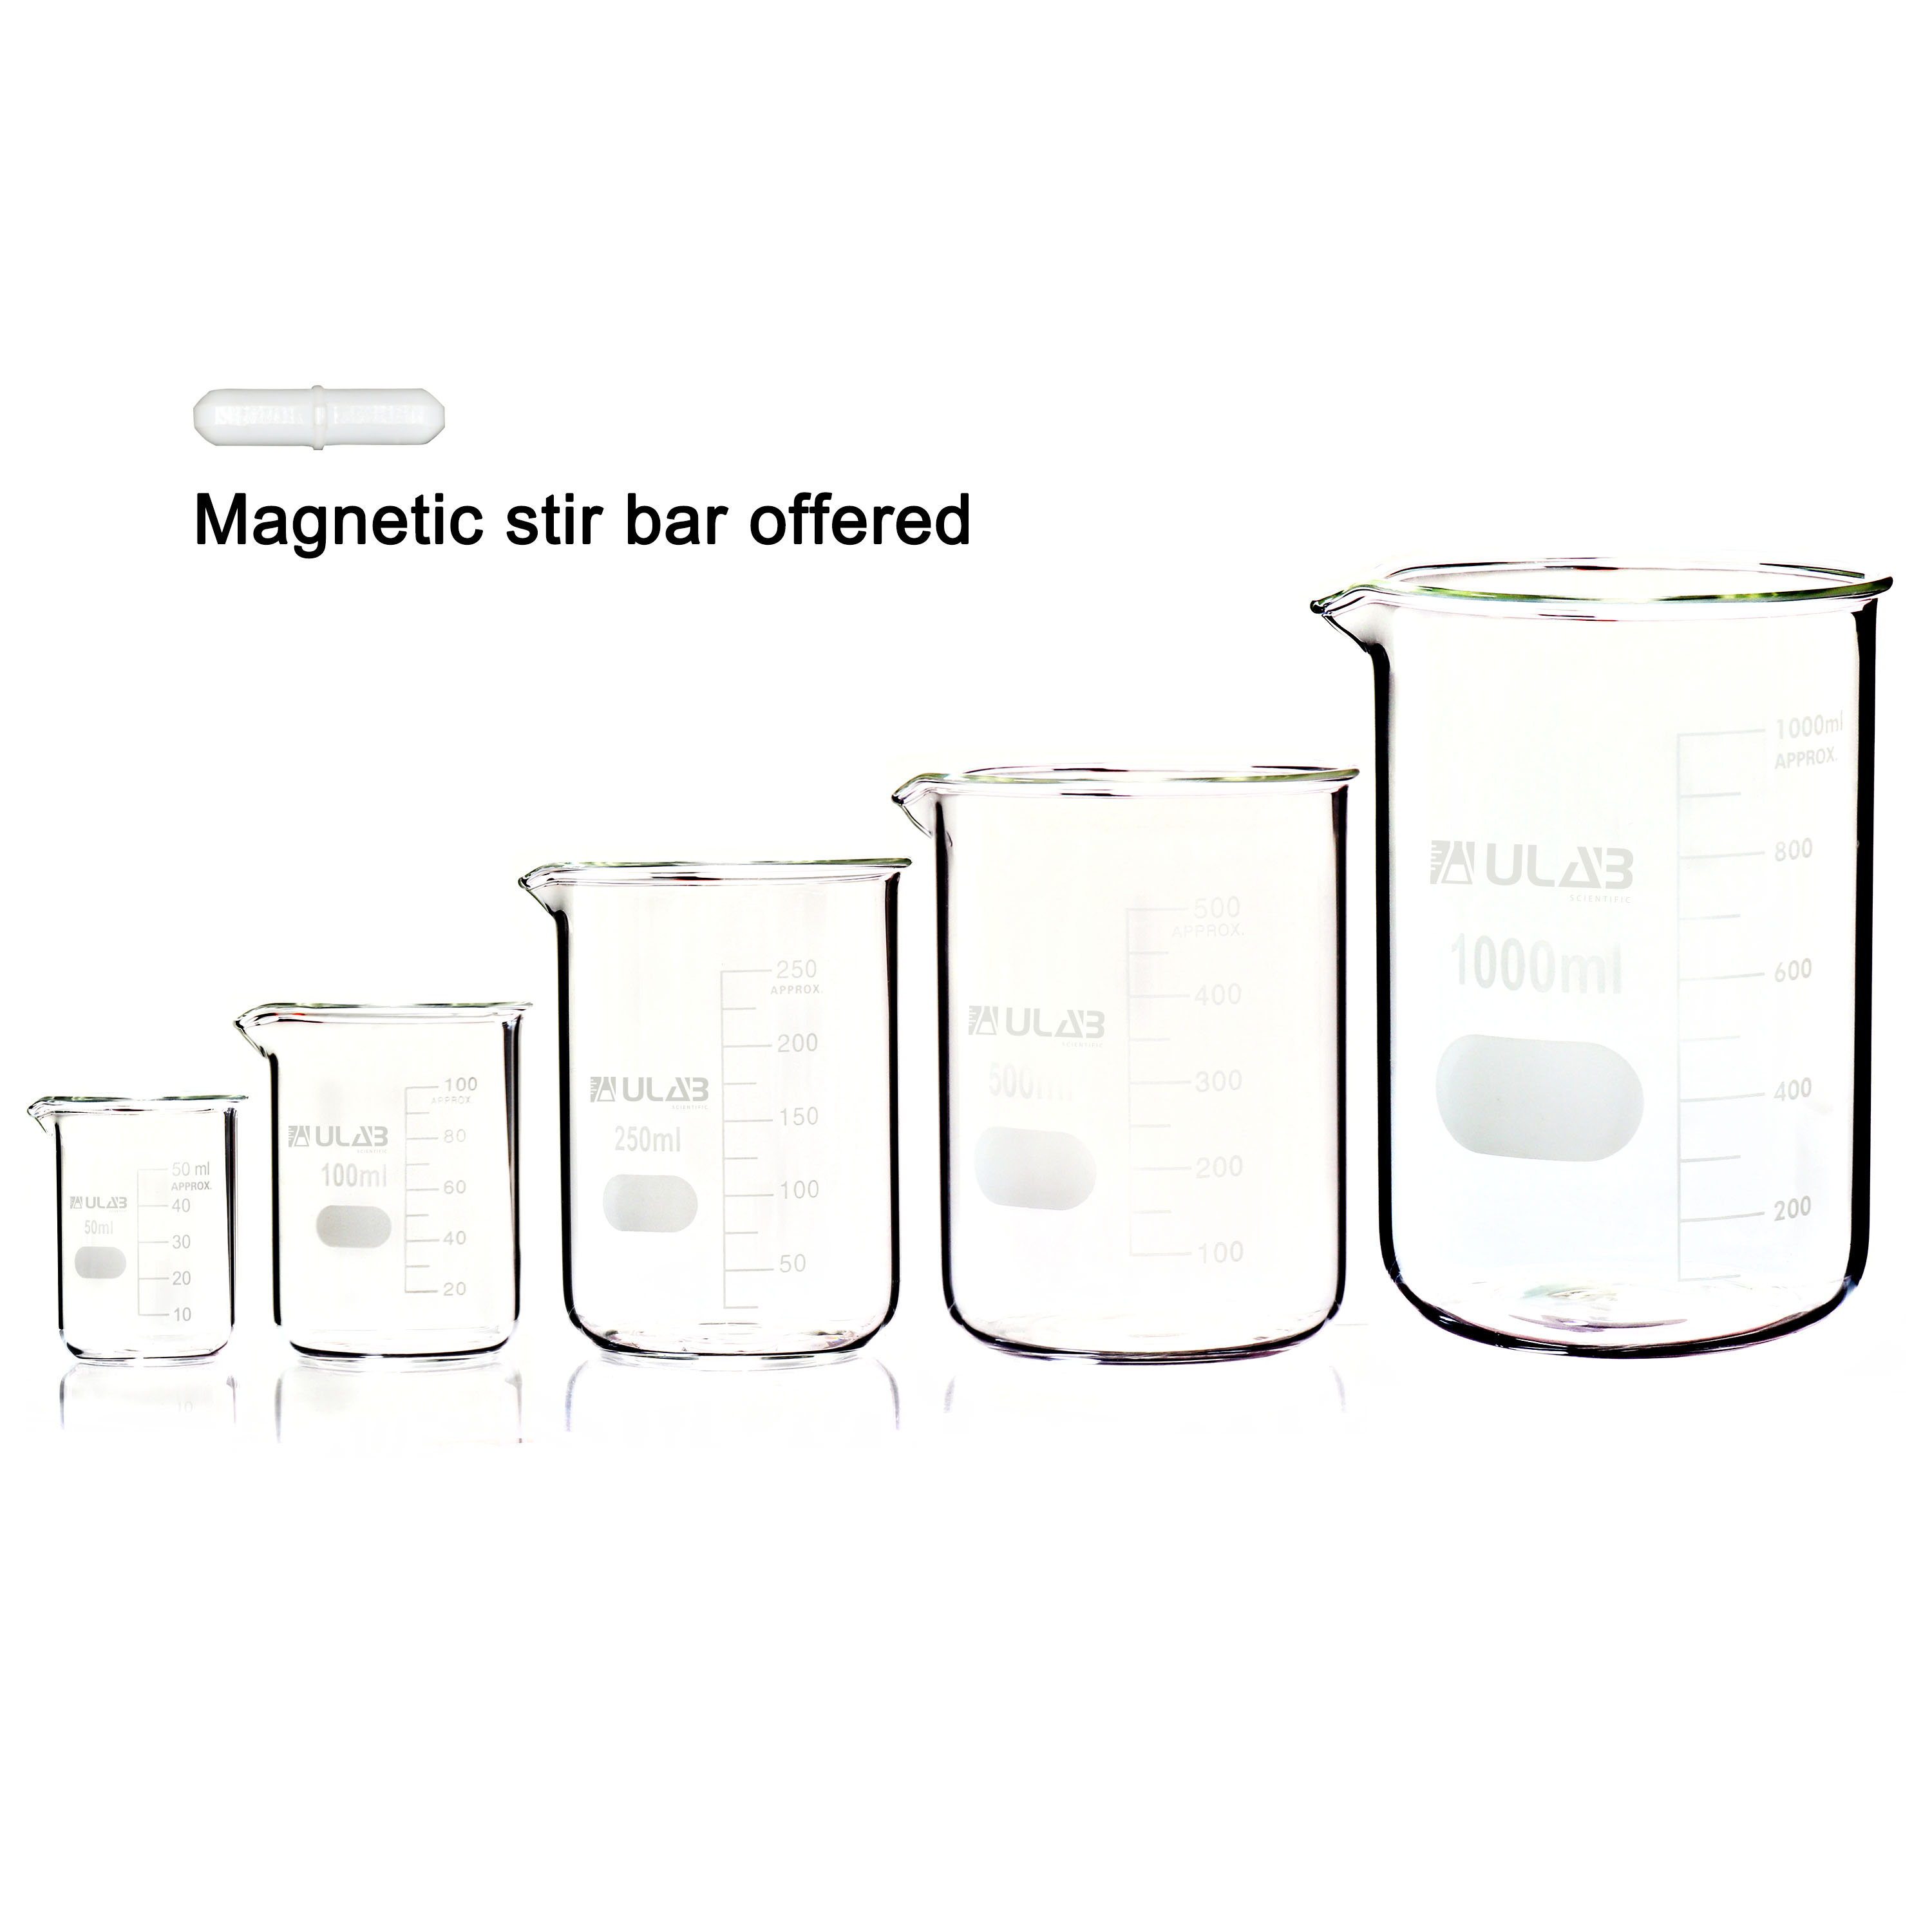 ULAB Scientific Glass Beaker Set with Magnetic Stir Bar Offered, 5 Sizes 50ml 100ml 250ml 500ml 1000ml, 3.3 Boro Griffin Low Form with Printed Graduation, UBG1002